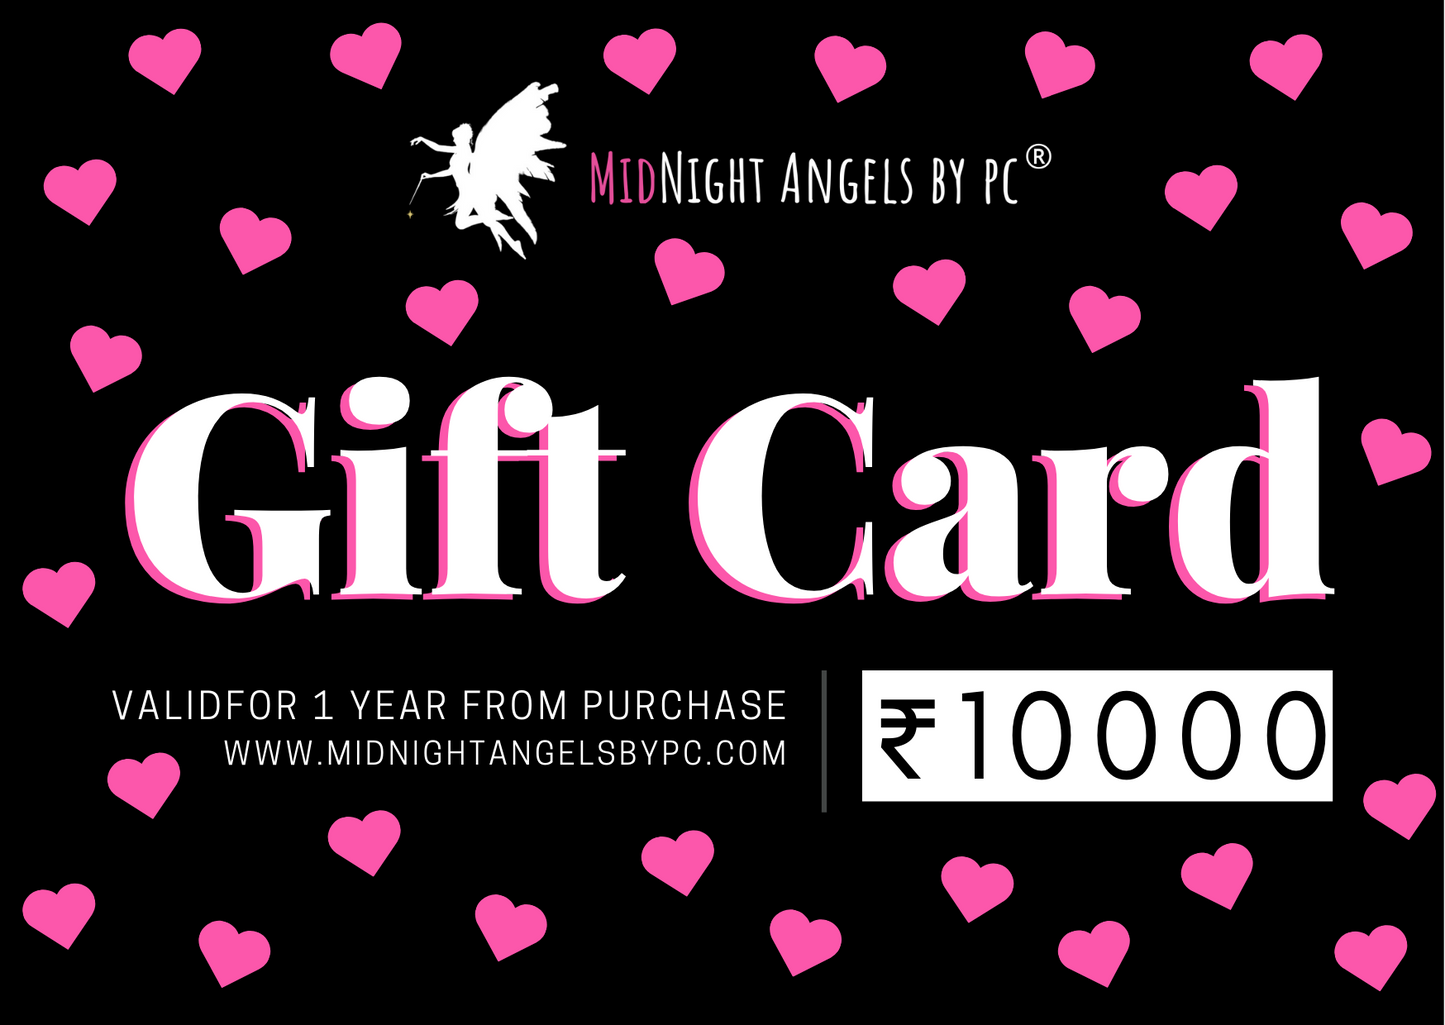 ₹10000/- MIDNIGHT ANGELS GIFT CARD